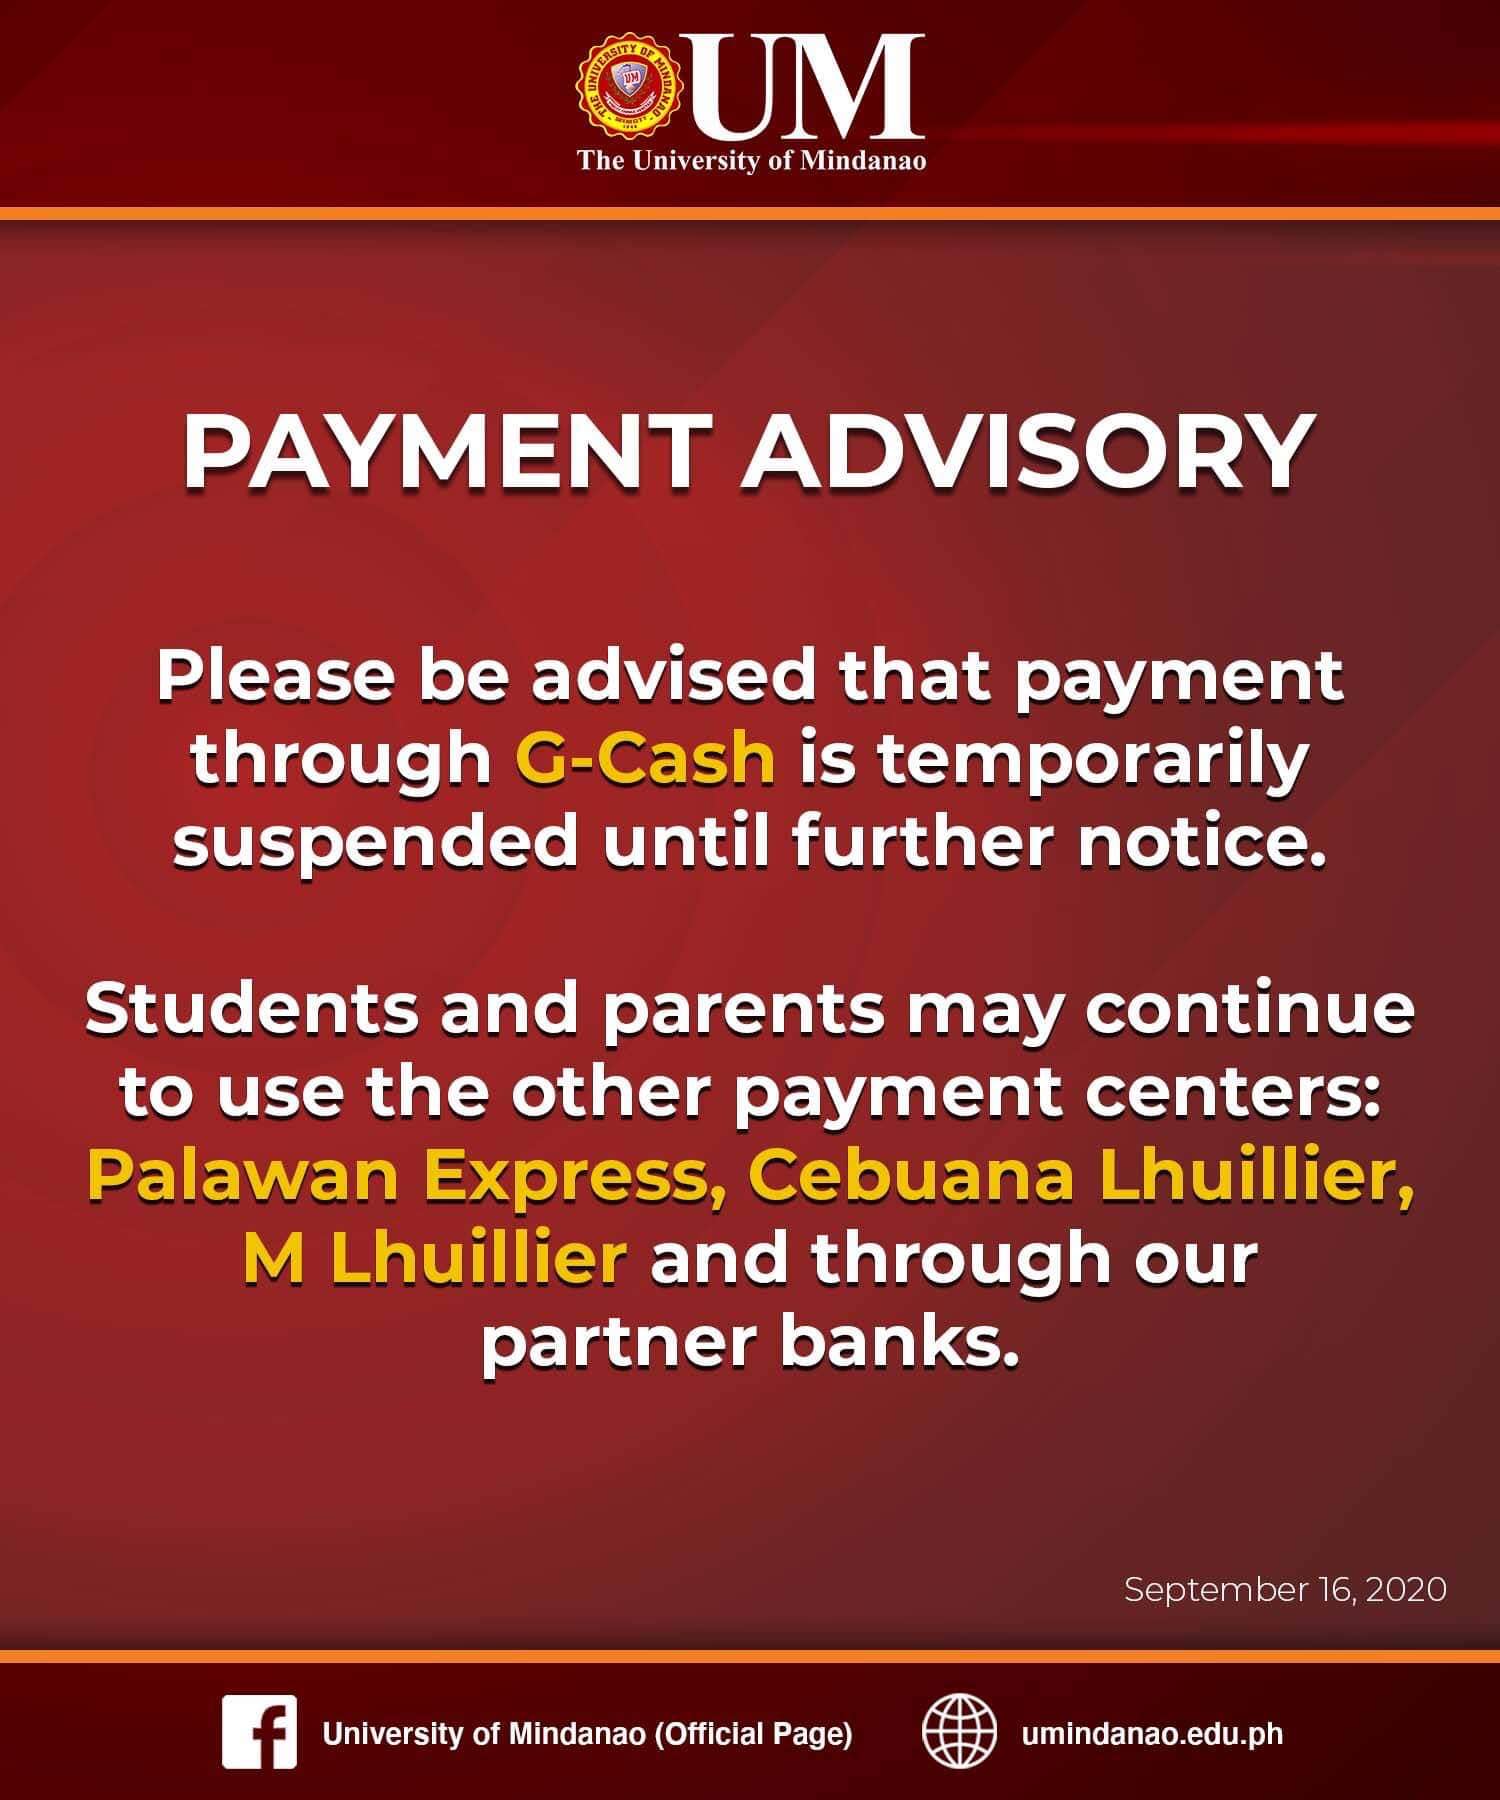 Payment through GCash is suspended